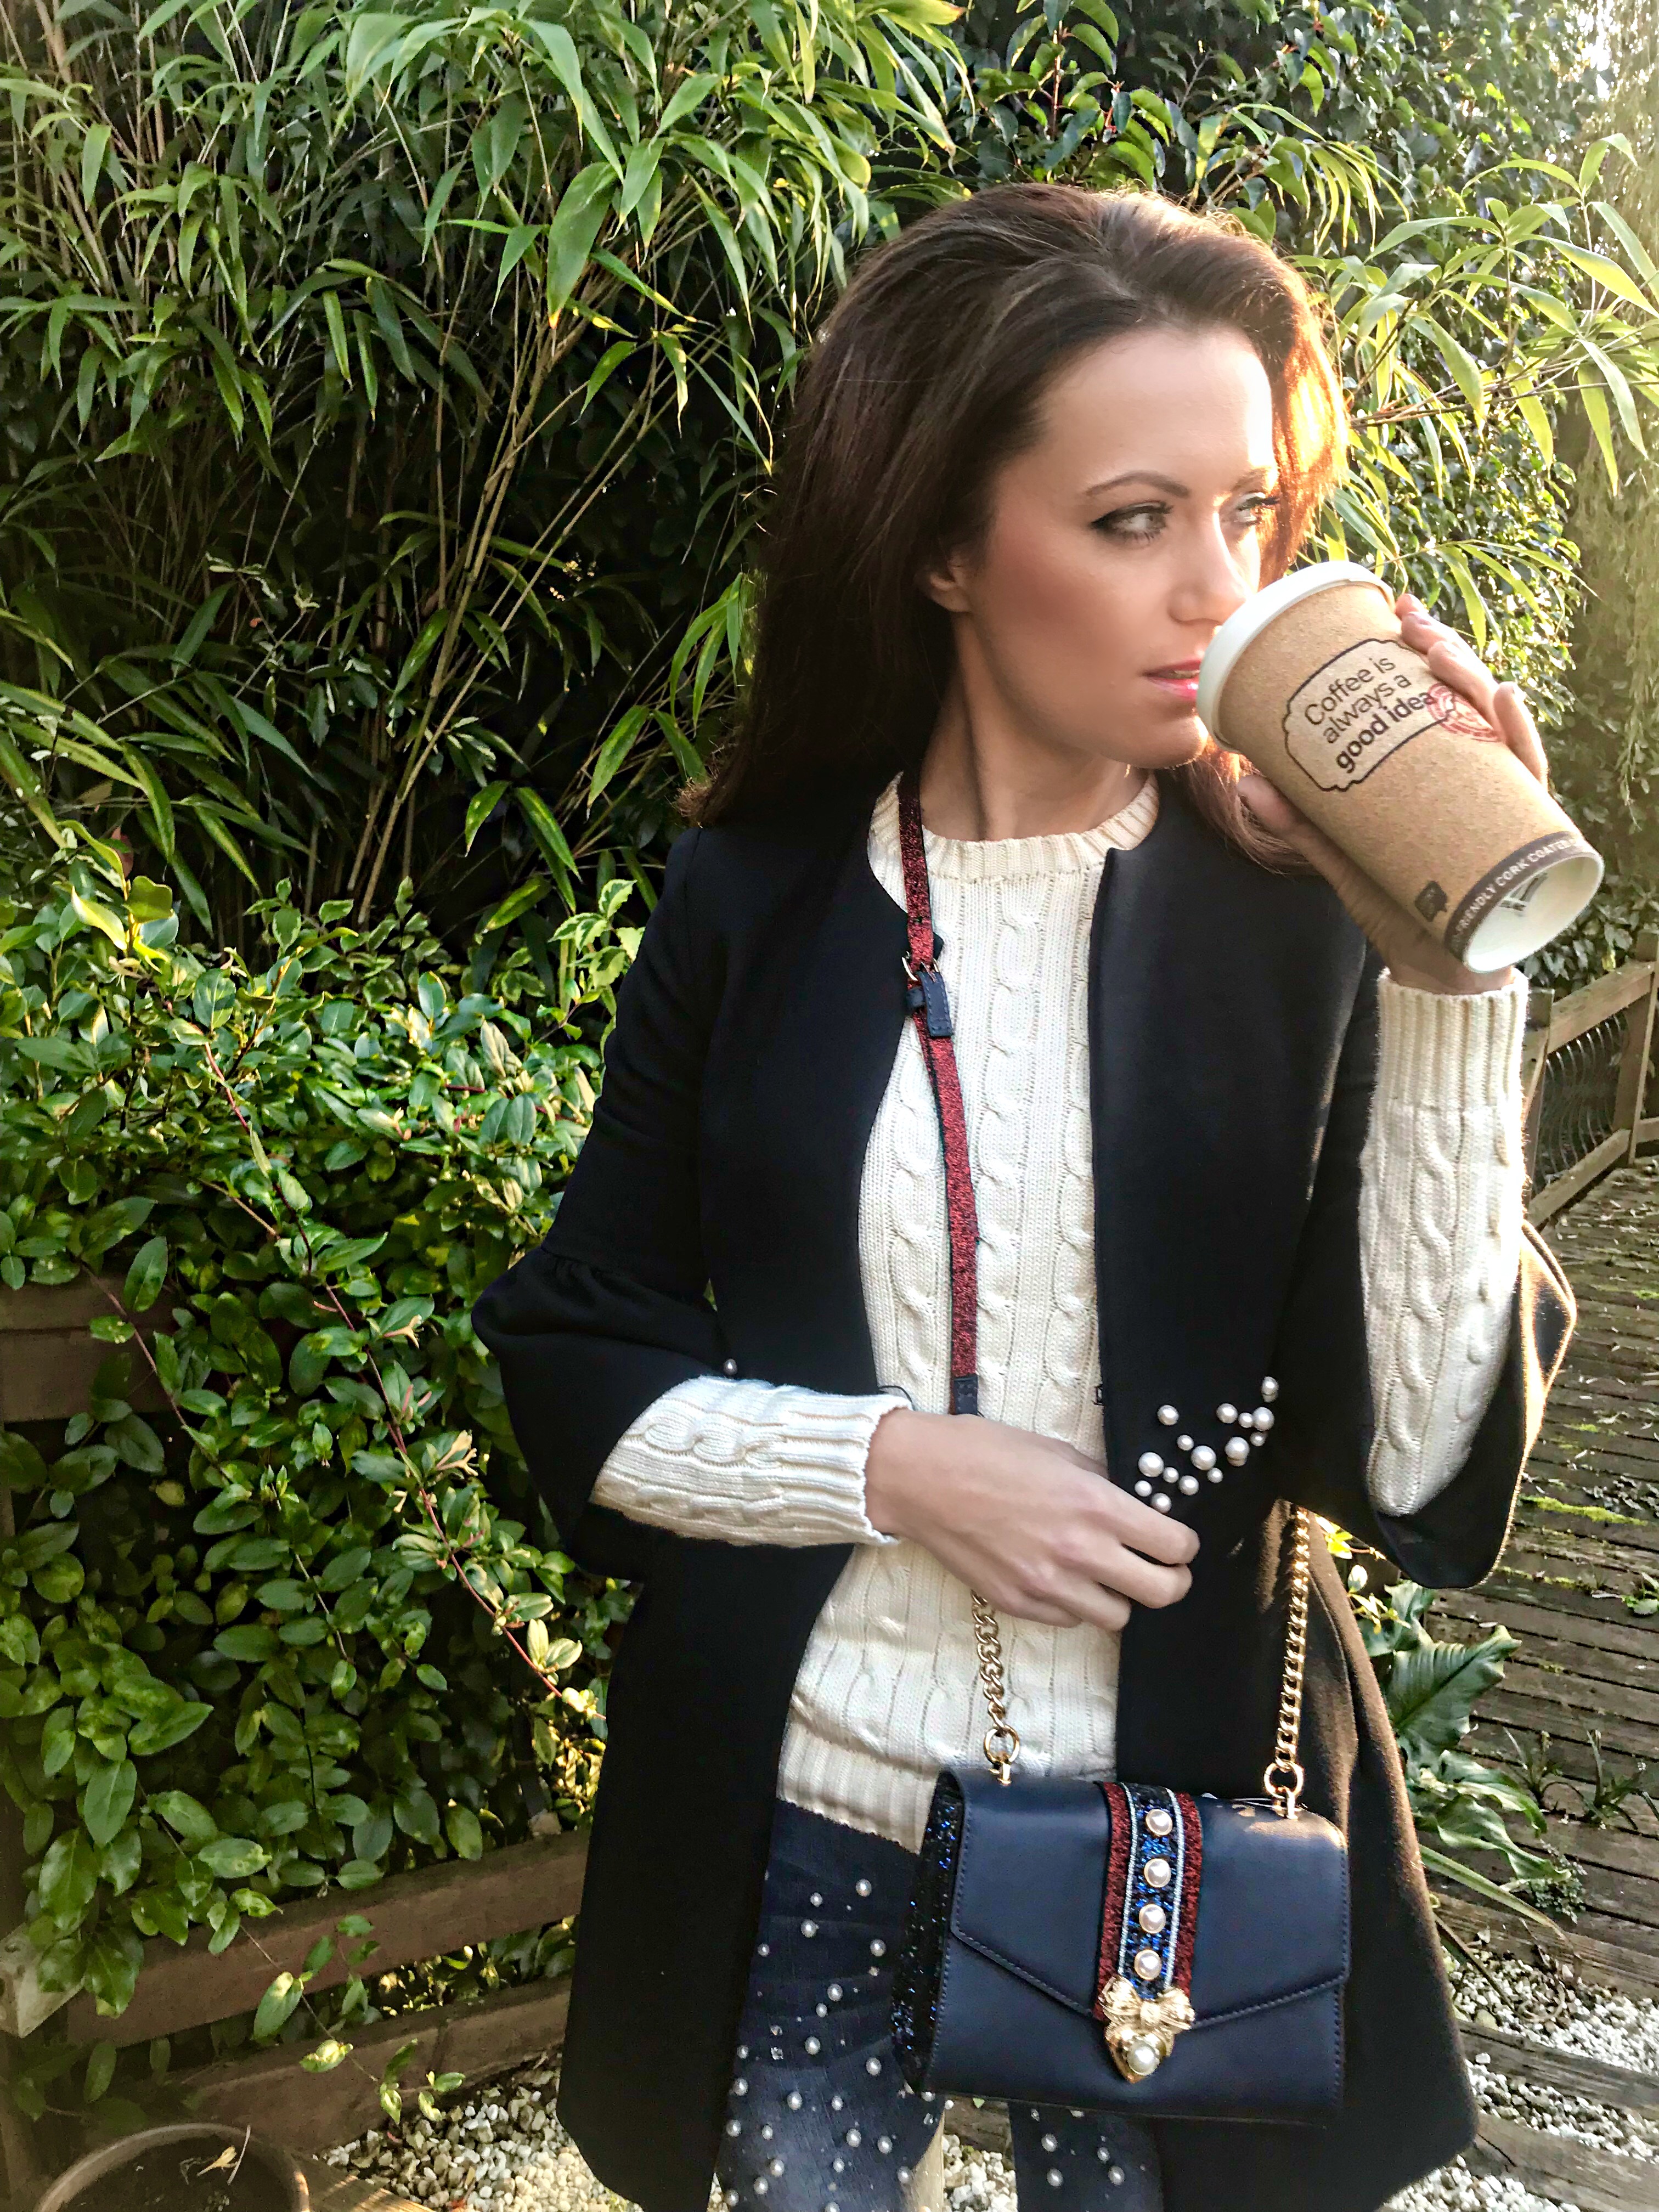 KG by Kurt Geiger Bow Pearl Detail Court Shoes, ALDO Pearl Detail Mini Cross Body Bag, Ralph Lauren Cable-Knit Crewneck Sweater and a pearl detail jacket from Zara.